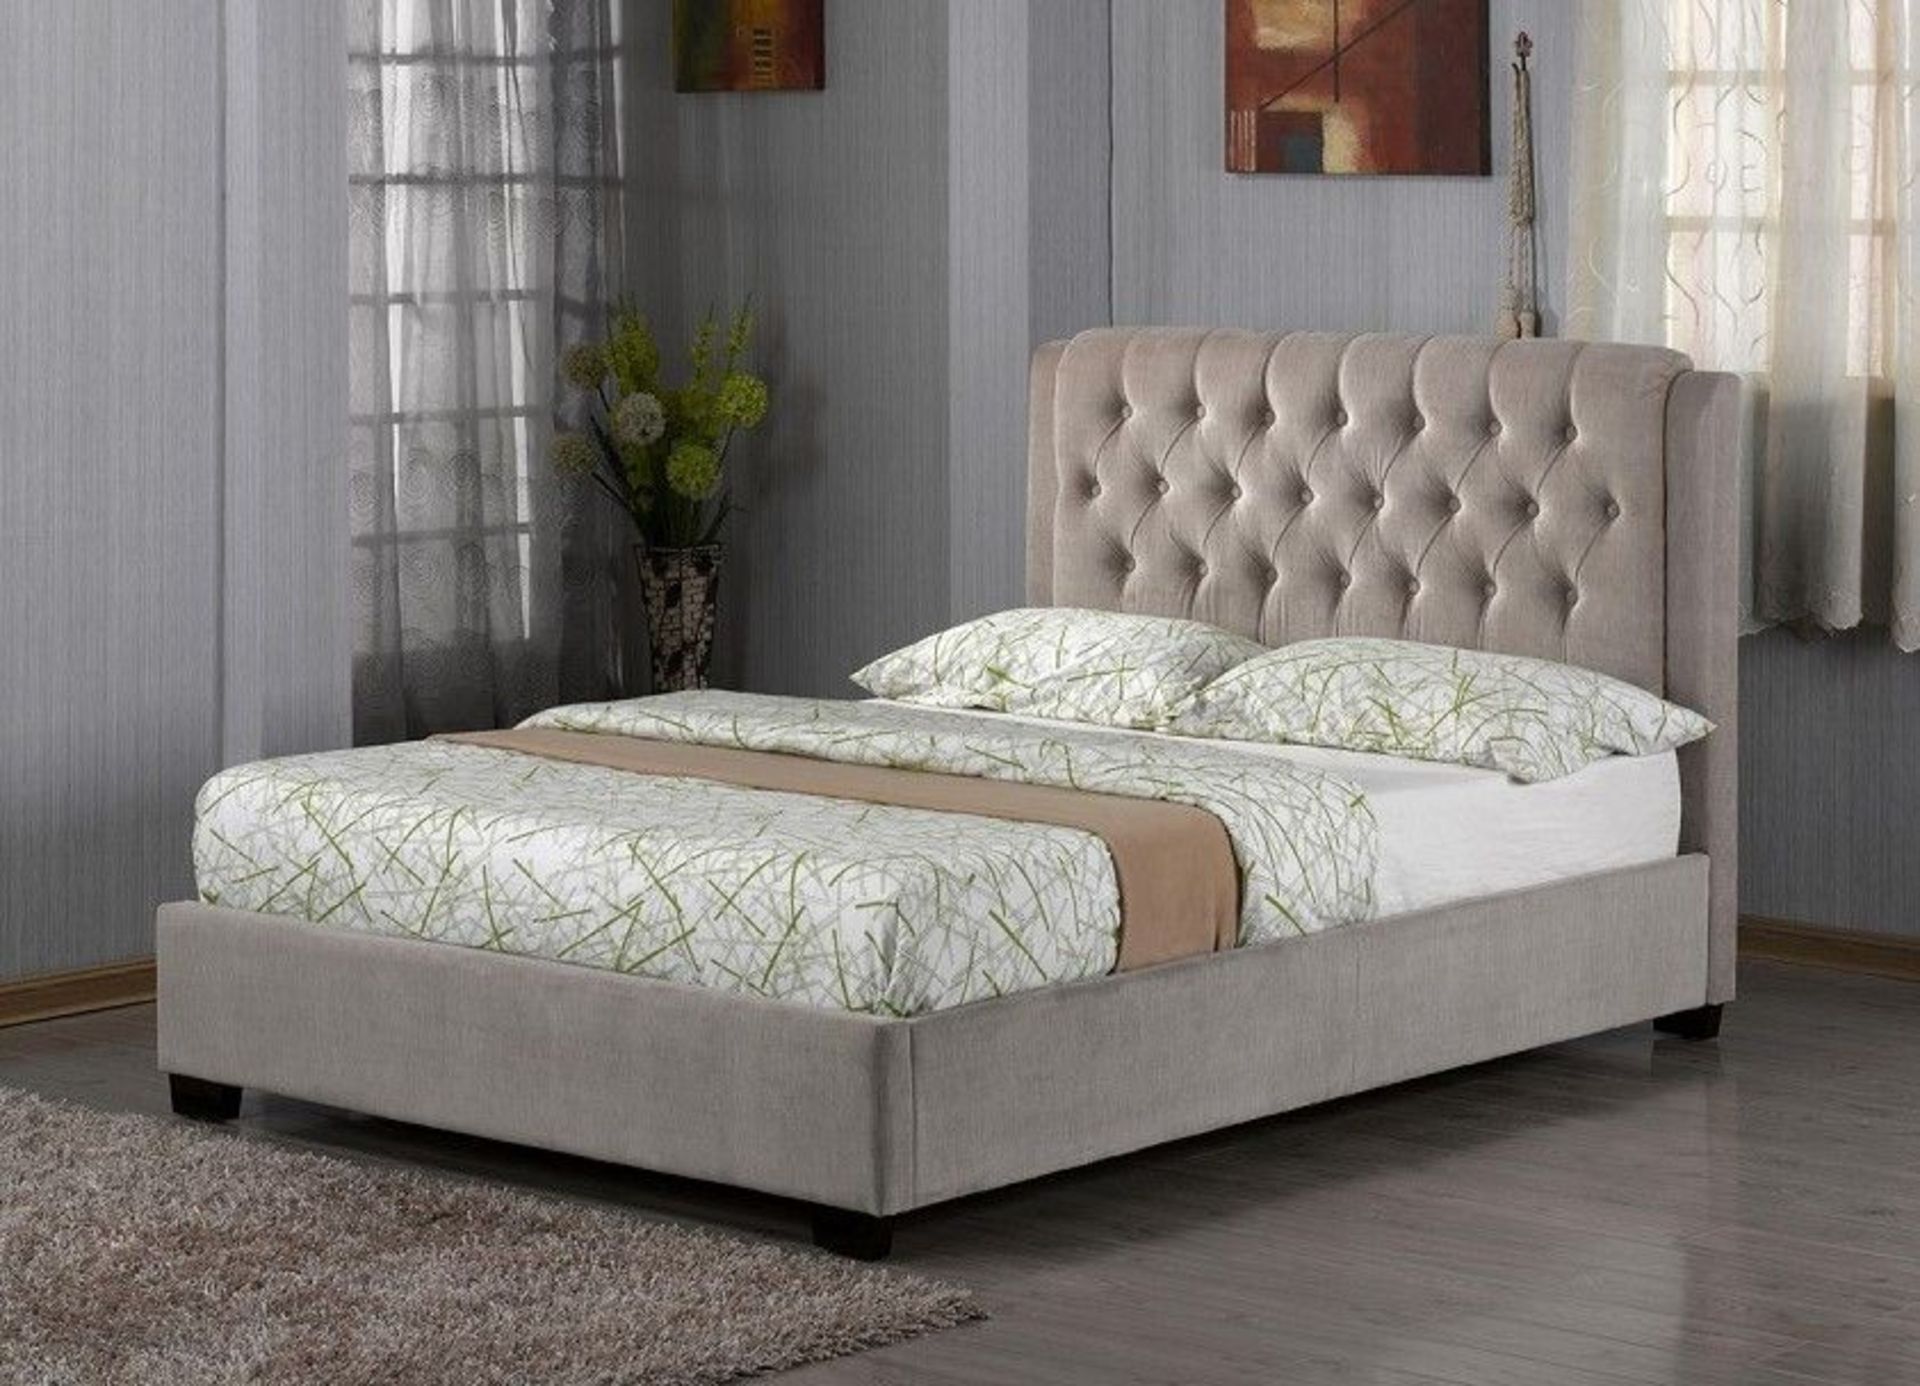 Brand new 4,6 double messidy bedstead in beige fabric